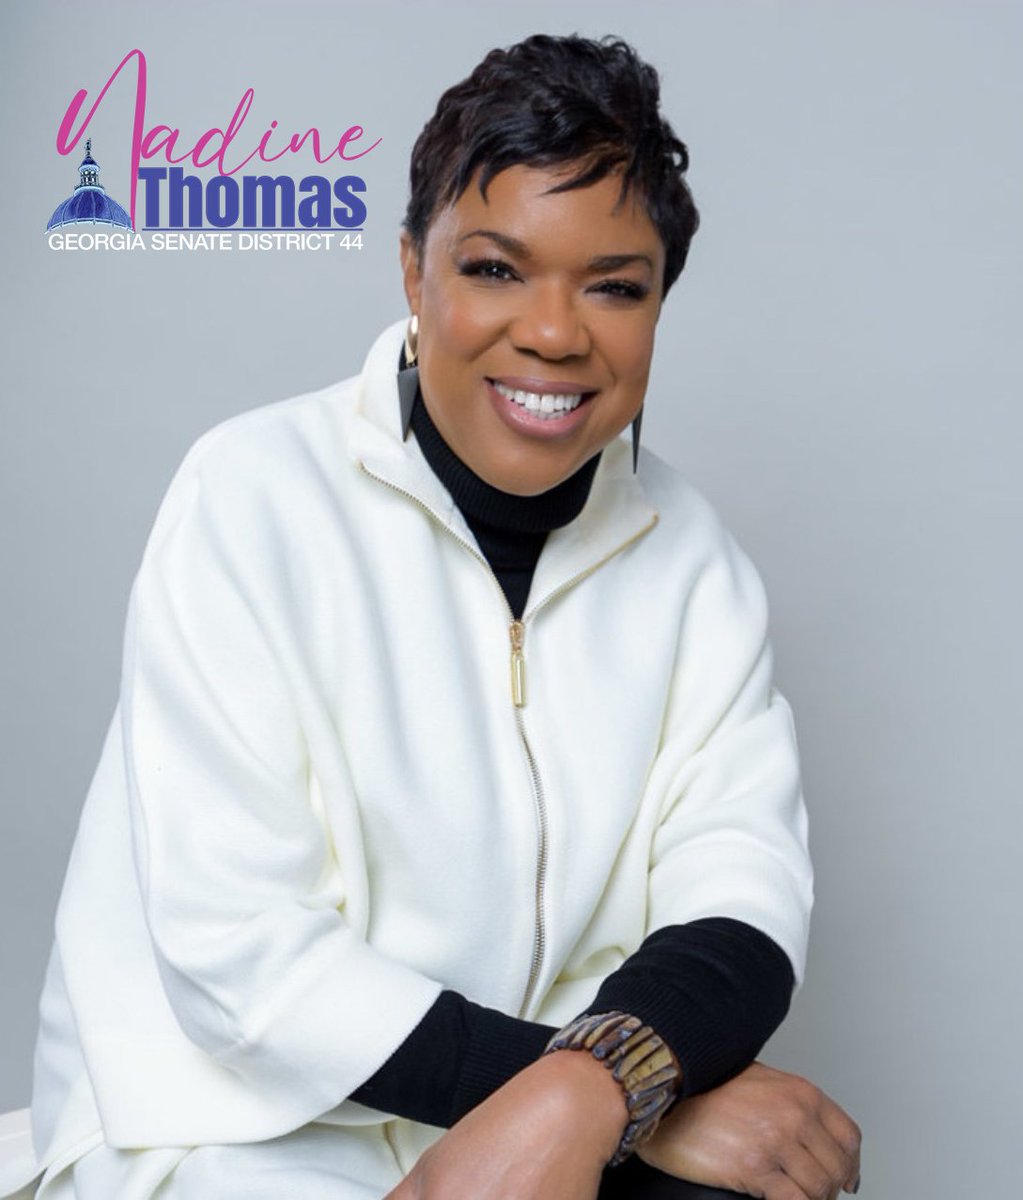 Former GA Sate Senator Nadine Thomas pictured here @ 71yrs old. There's nothing more beautiful than an ageless and timeless Black woman. Re-elect former GA State Senator Nadine Thomas - Senate District 44. BLACK VOTERS MATTER & SO DOES BLACK REPRESENTATION...#gapol @RepNikema